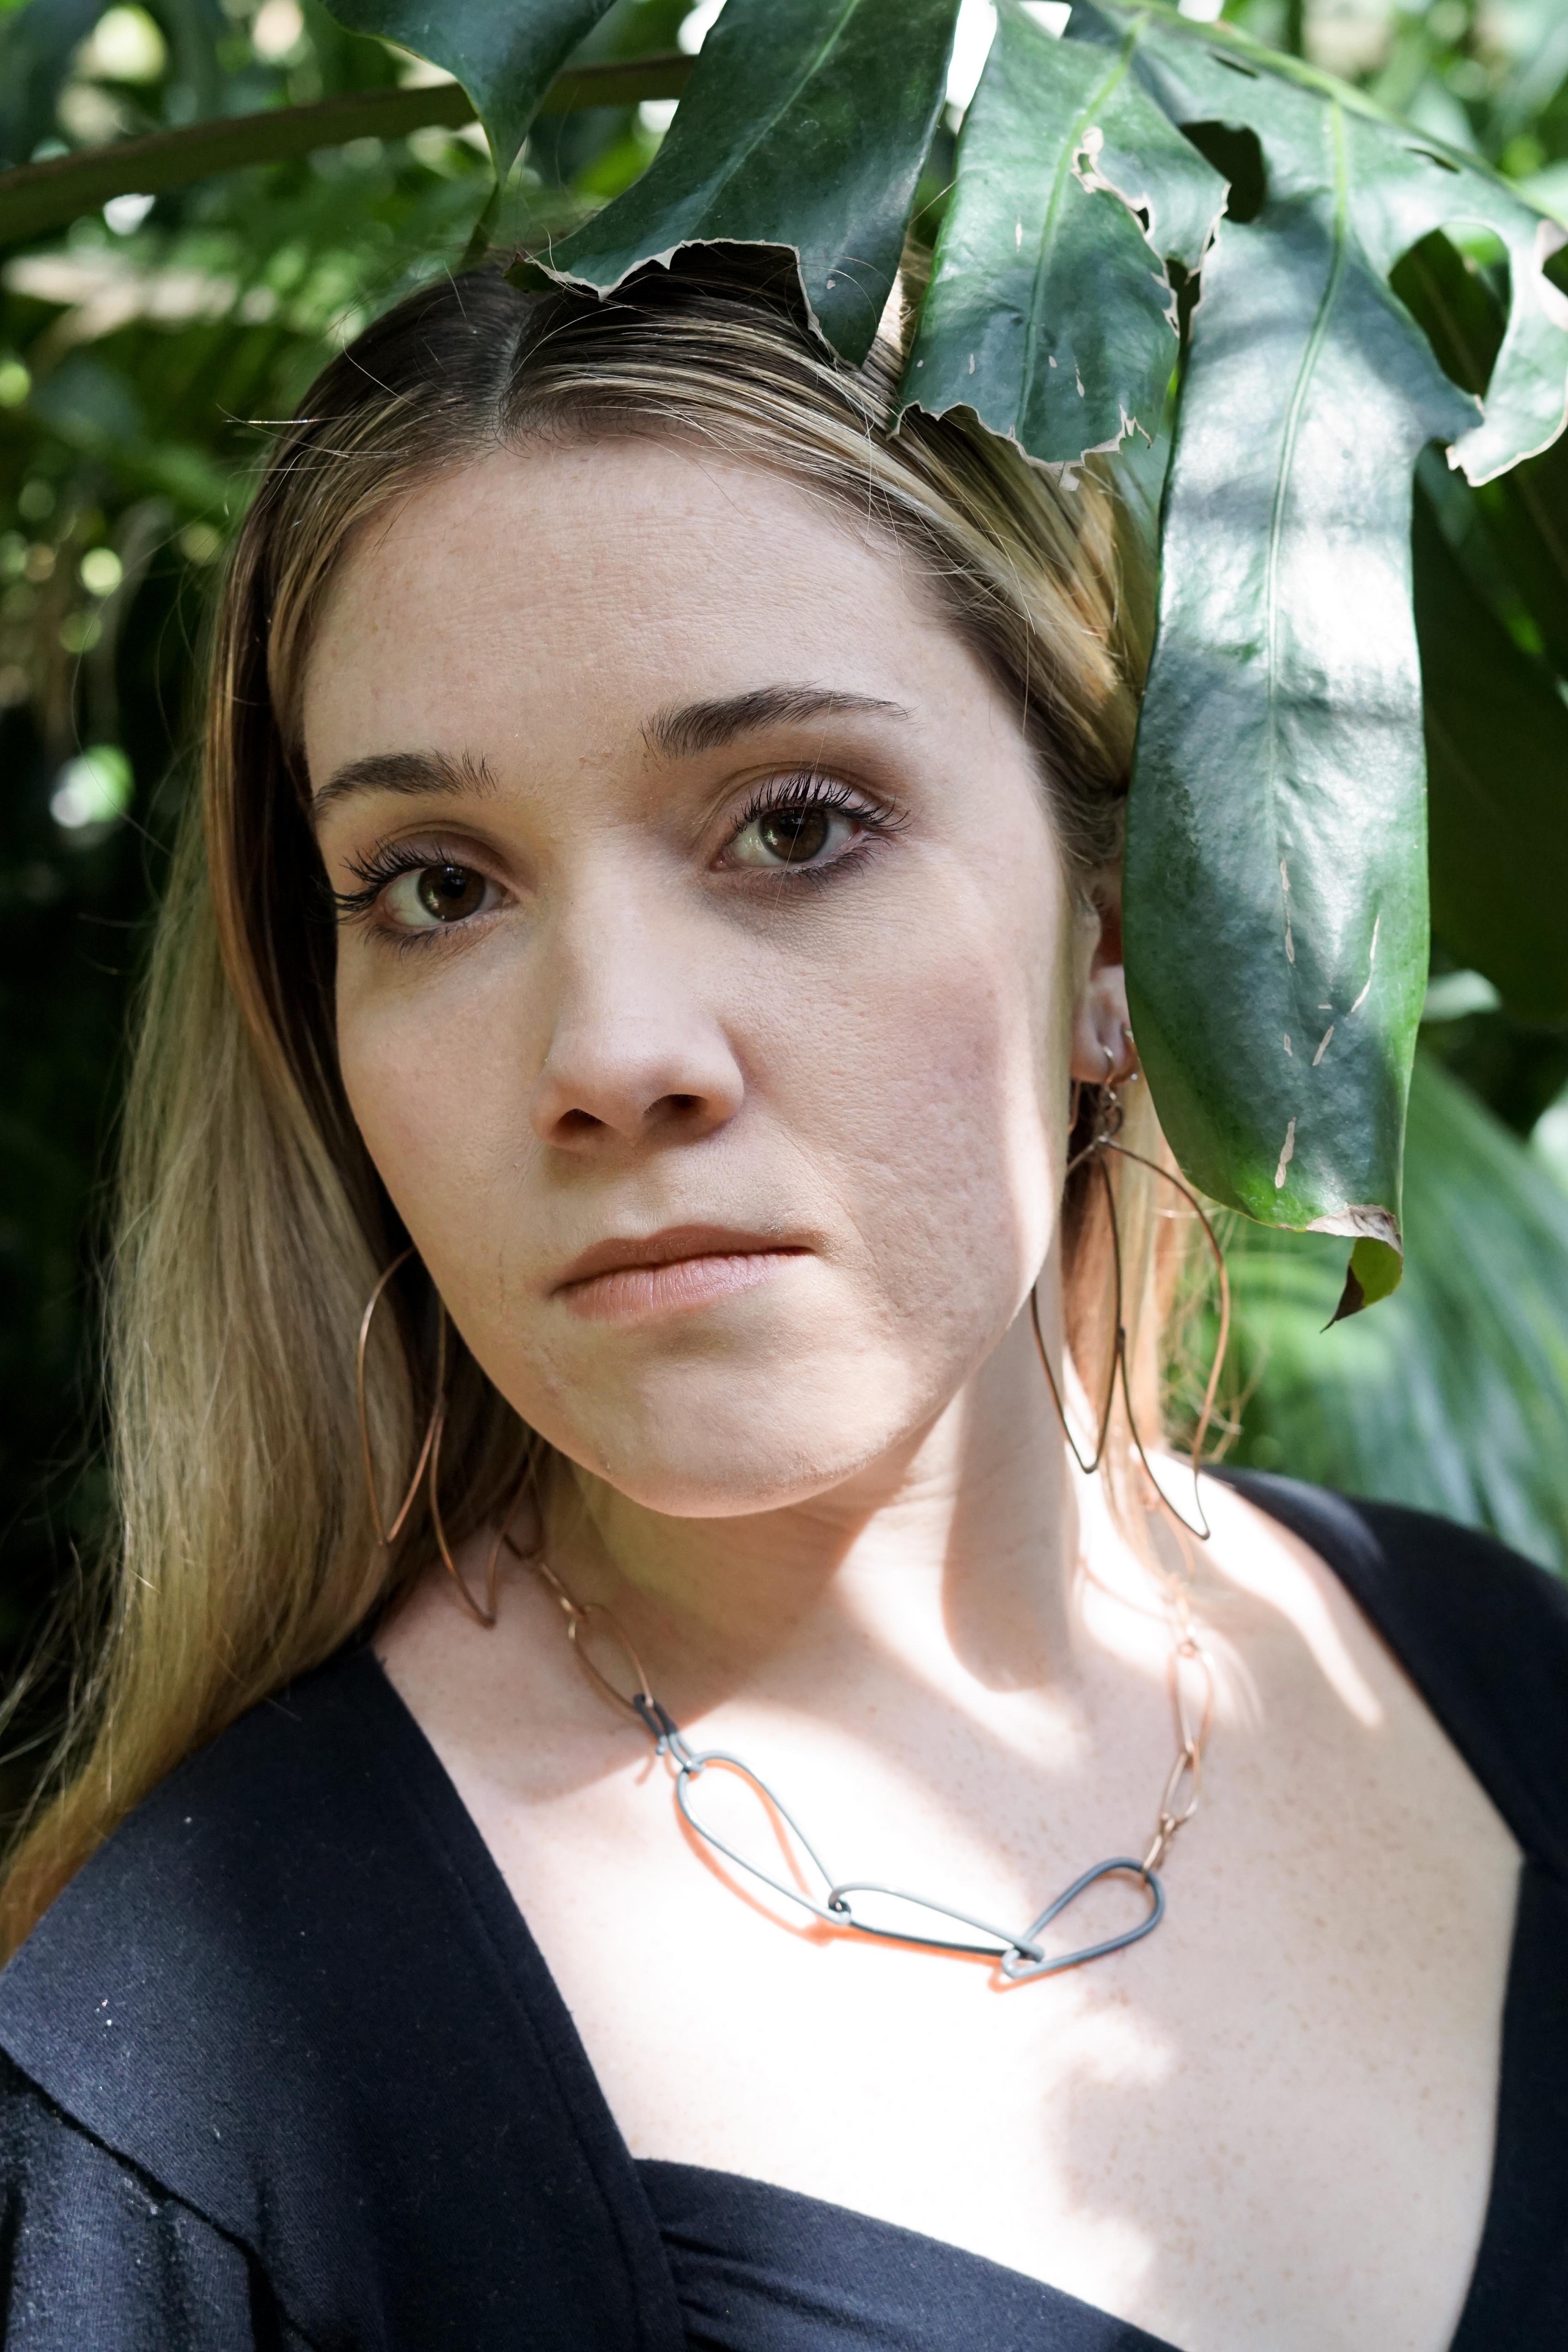 Trista in the garden with a monstera leaf wearing bronze statement earrings and a bronze and grey chain link necklace